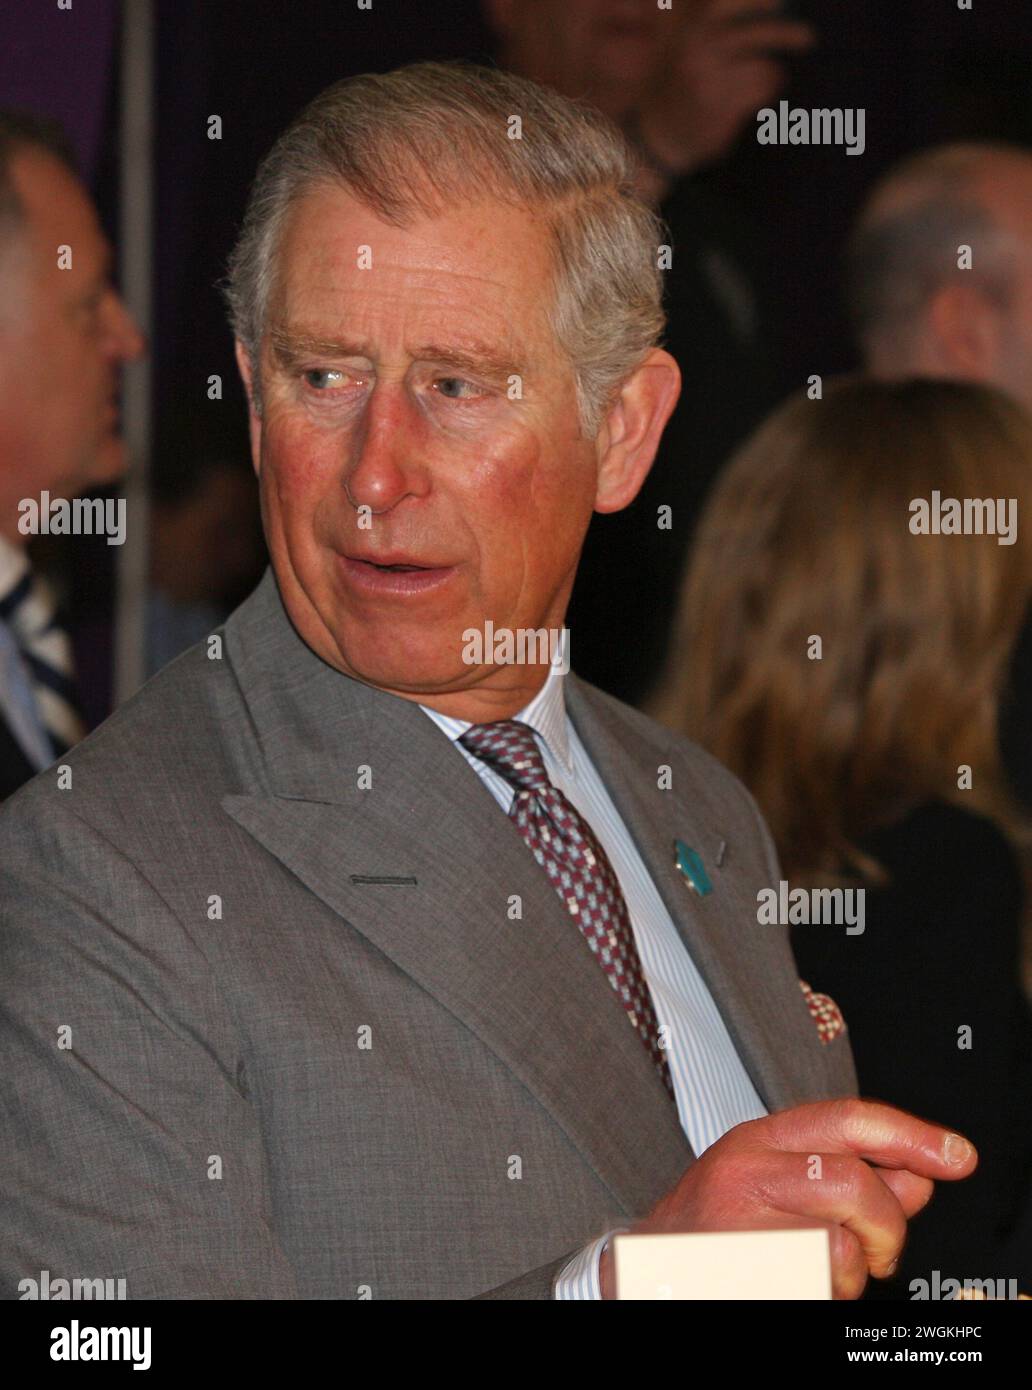 London, United States Of America. 16th Mar, 2012. 2012 ARCHIVE PHOTOS BREAKING NEWS - King Charles III, 75, has been diagnosed with cancer and will be avoiding public events after being advised by his doctors to minimize in-person contacts, Buckingham Palace announced Monday. People: King Charles III Credit: Storms Media Group/Alamy Live News Stock Photo